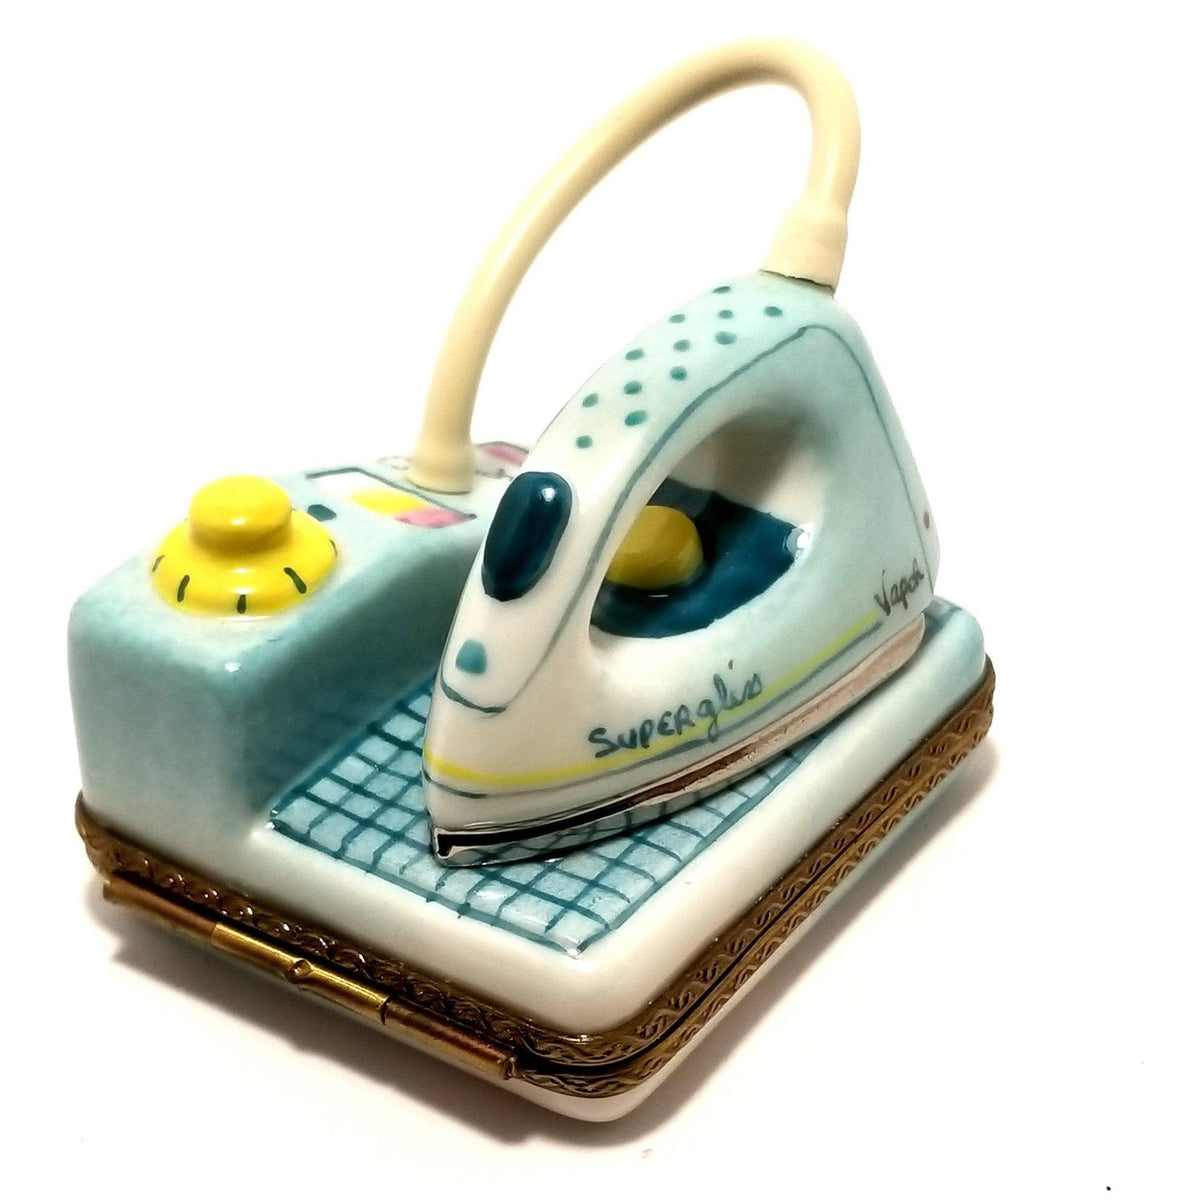 Vapor Iron Ironing Board No. 1 of 1000 Limoges Box Figurine - Limoges Box Boutique